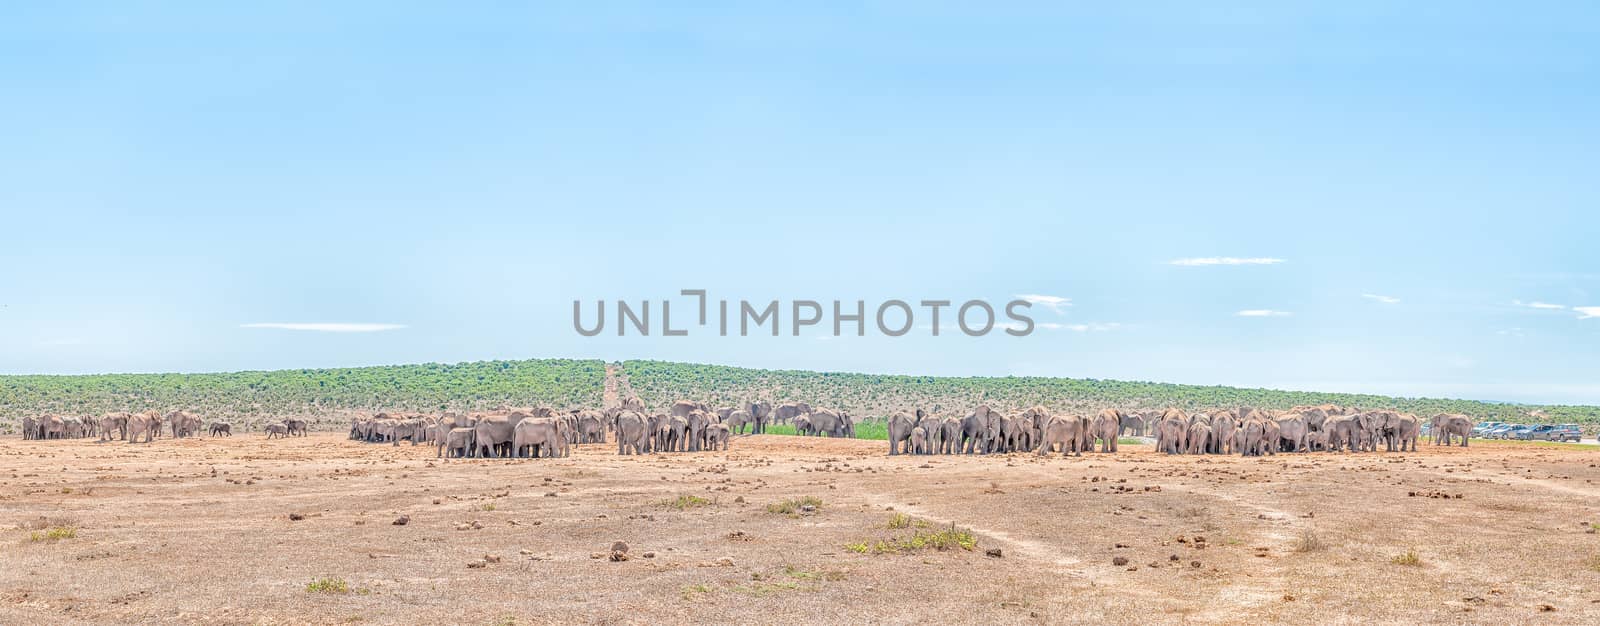 ADDO ELEPHANT NATIONAL PARK, SOUTH AFRICA - FEBRUARY 23, 2016: More than 200 elephants waiting in family groups to drink at Hapoor Dam